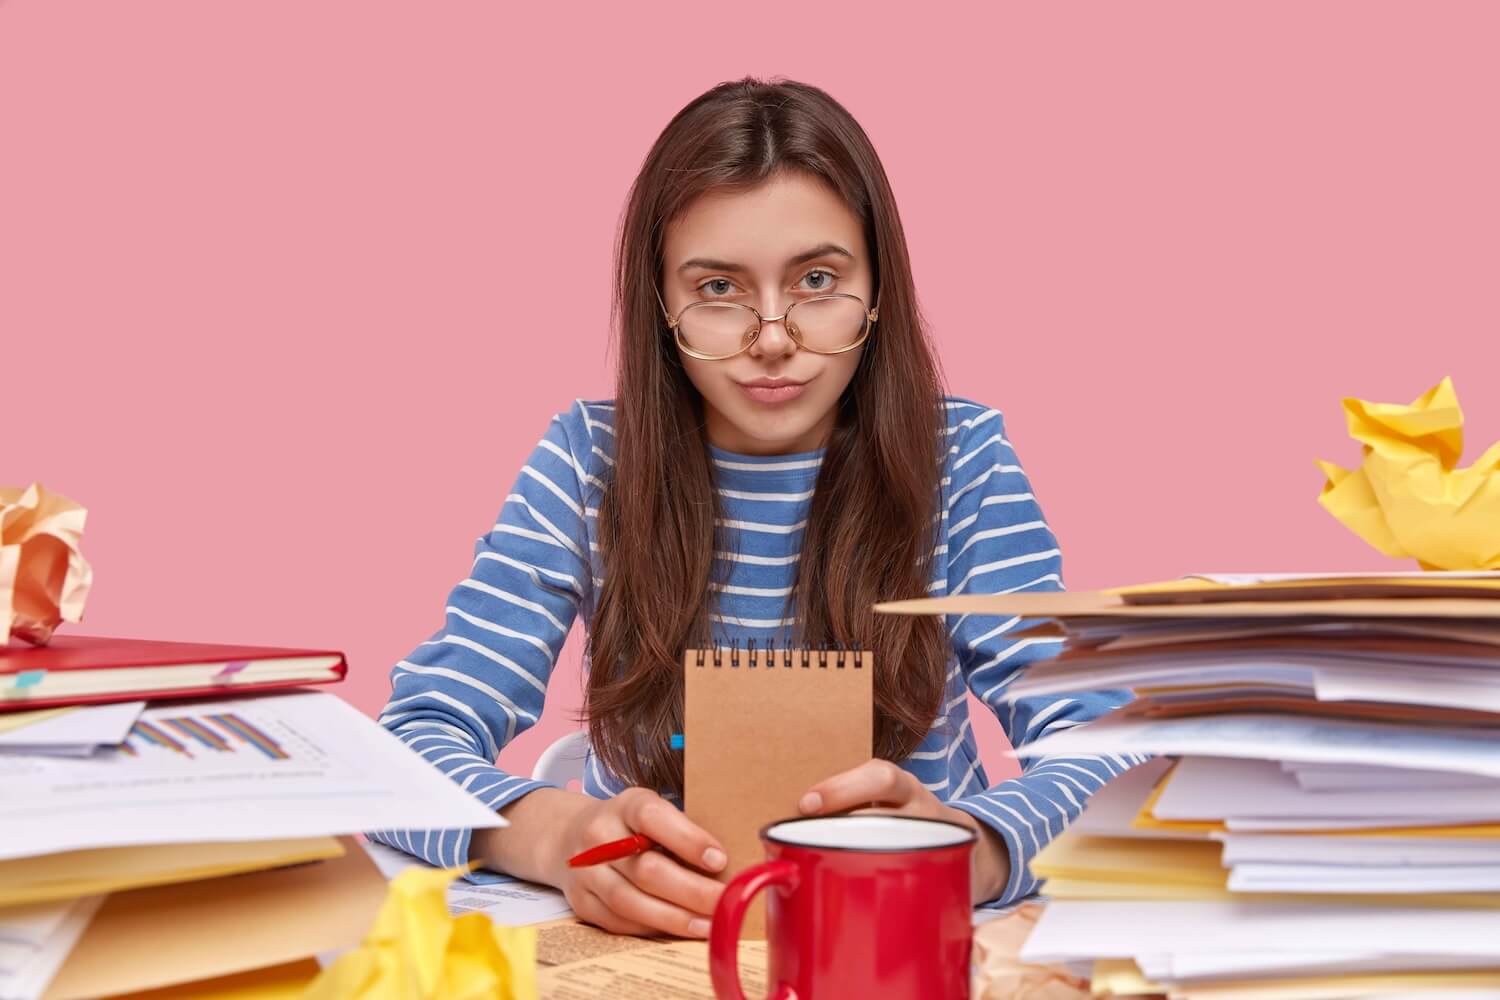 Girl student with books